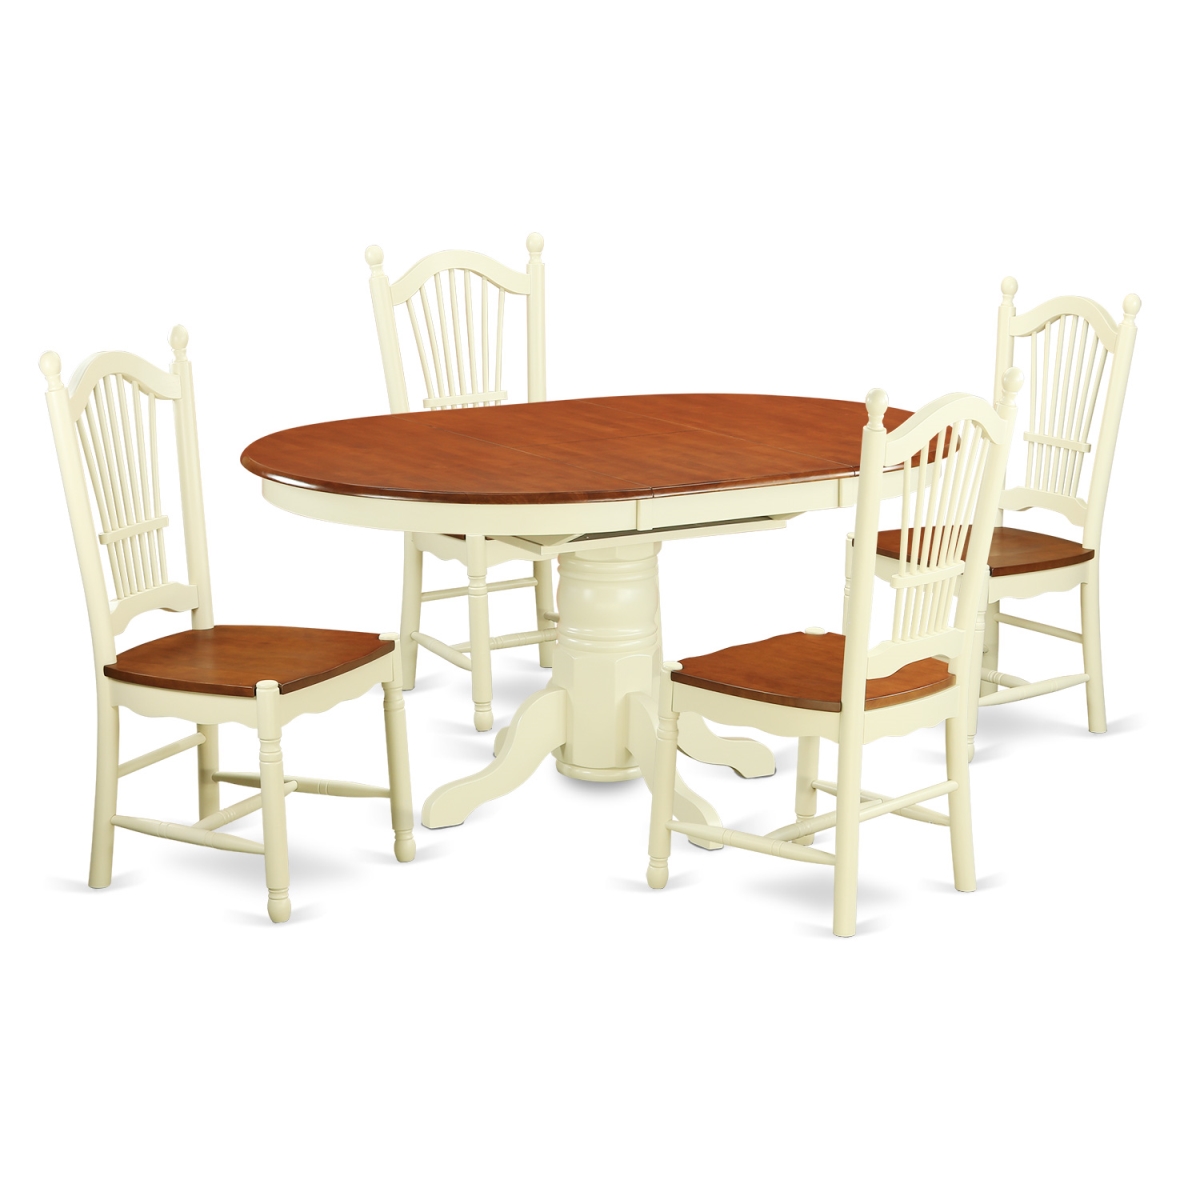 Picture of East West Furniture AVDO5-WHI-W Dining Room Table Set - Kitchen Table & 4 Chairs, Buttermilk & Cherry - 5 Piece